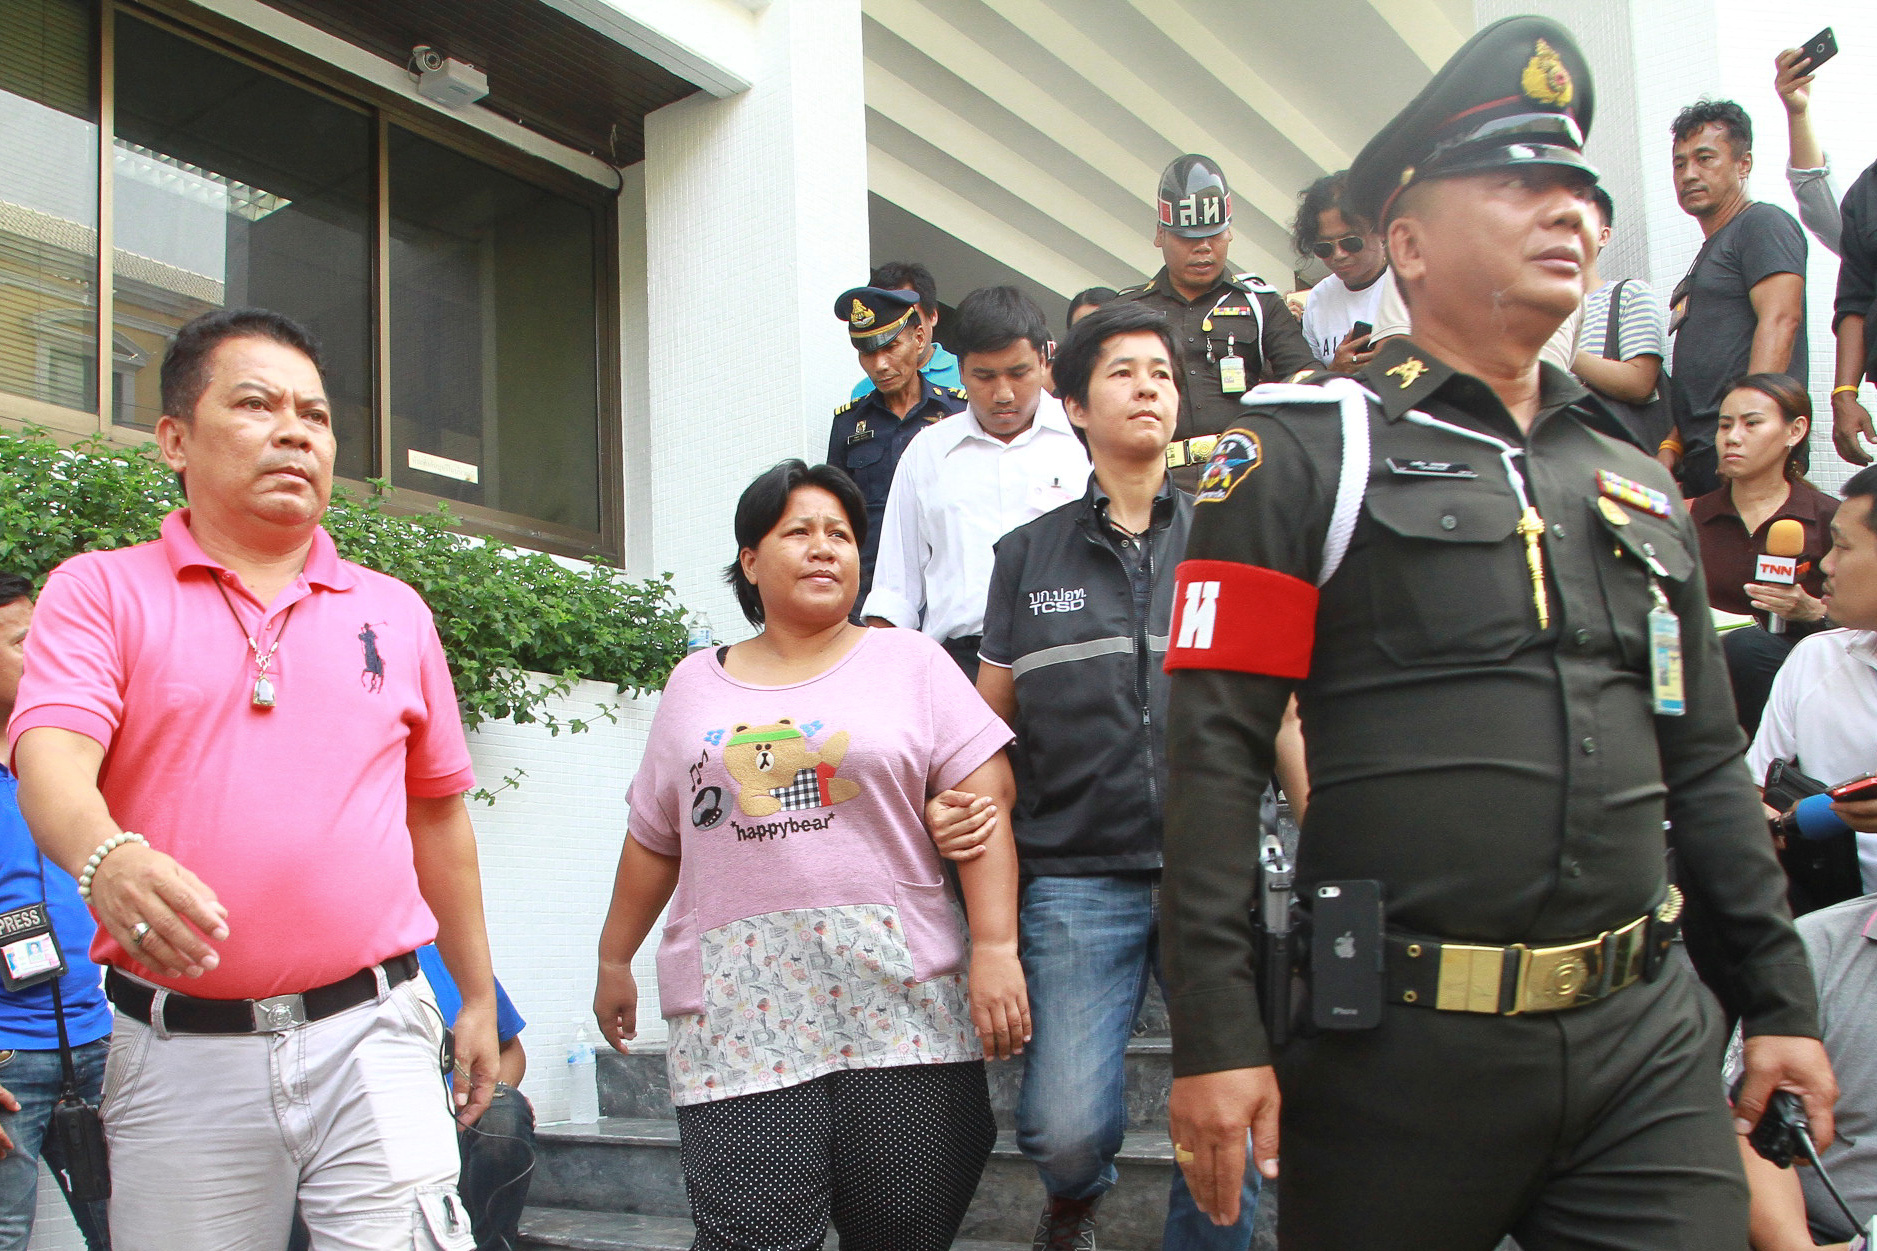 Patnaree Chankij, the mother of an anti-junta activist, is escorted by police as she leaves a military court in Bangkok